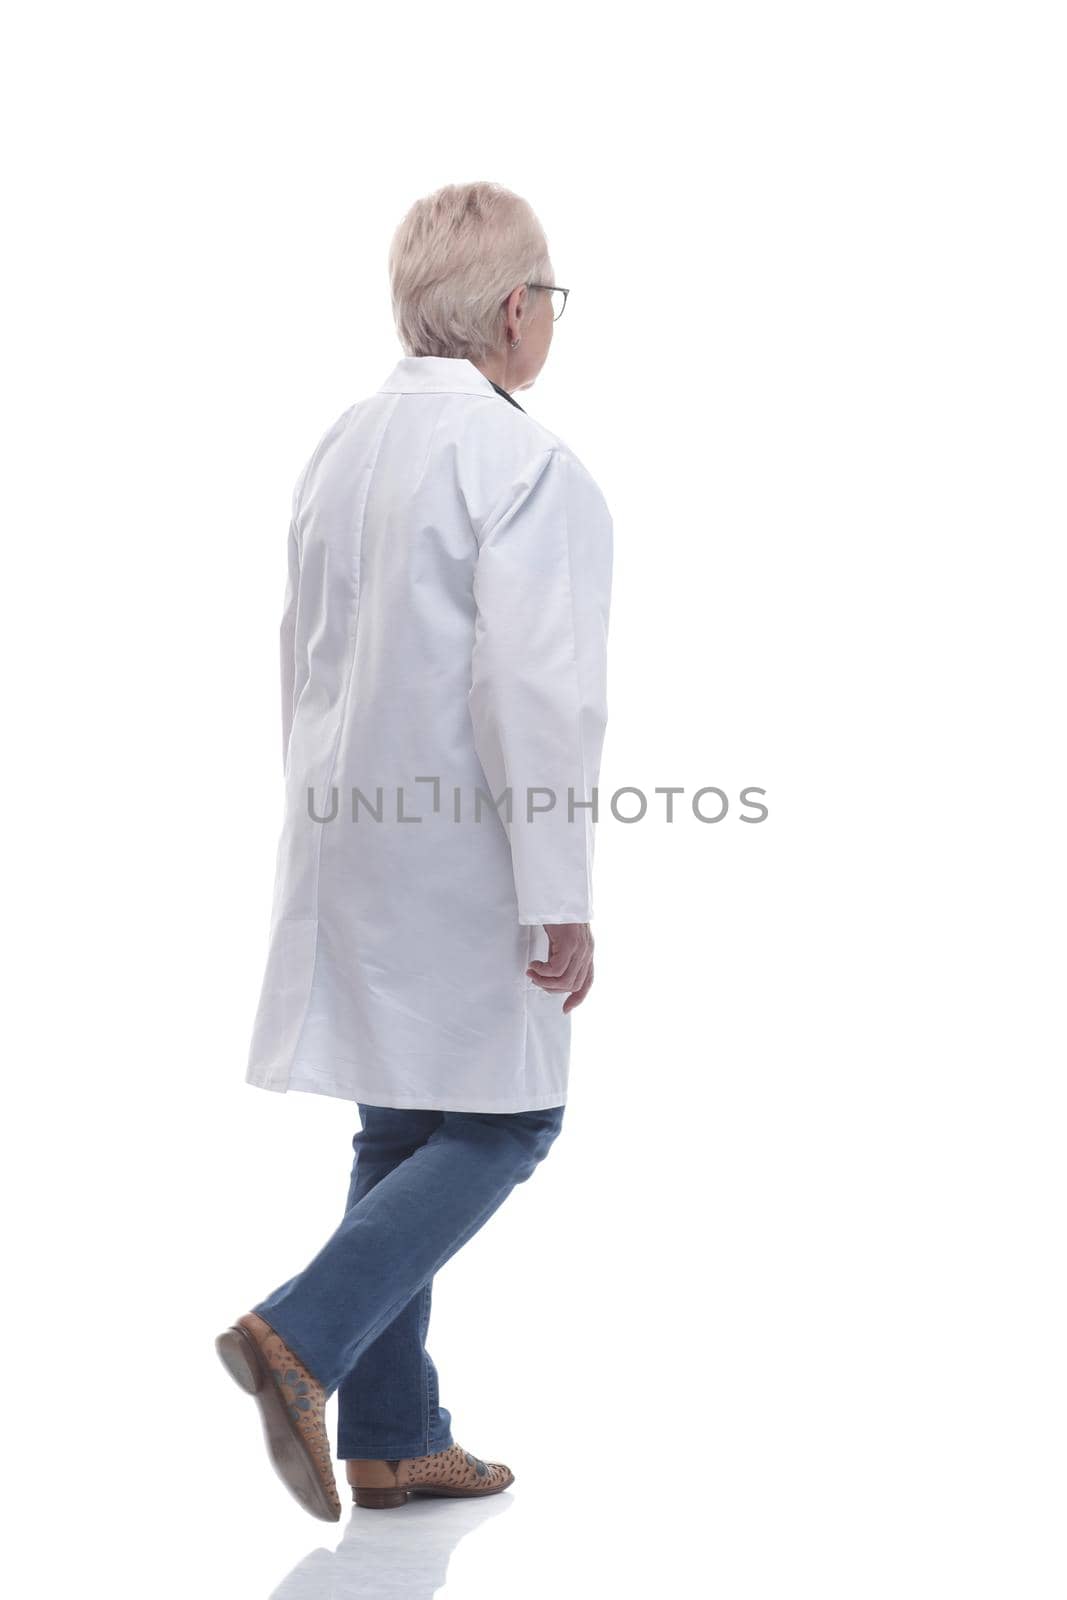 in full growth. e xperienced f emale d octor w alking t owards you . isolated on a white background